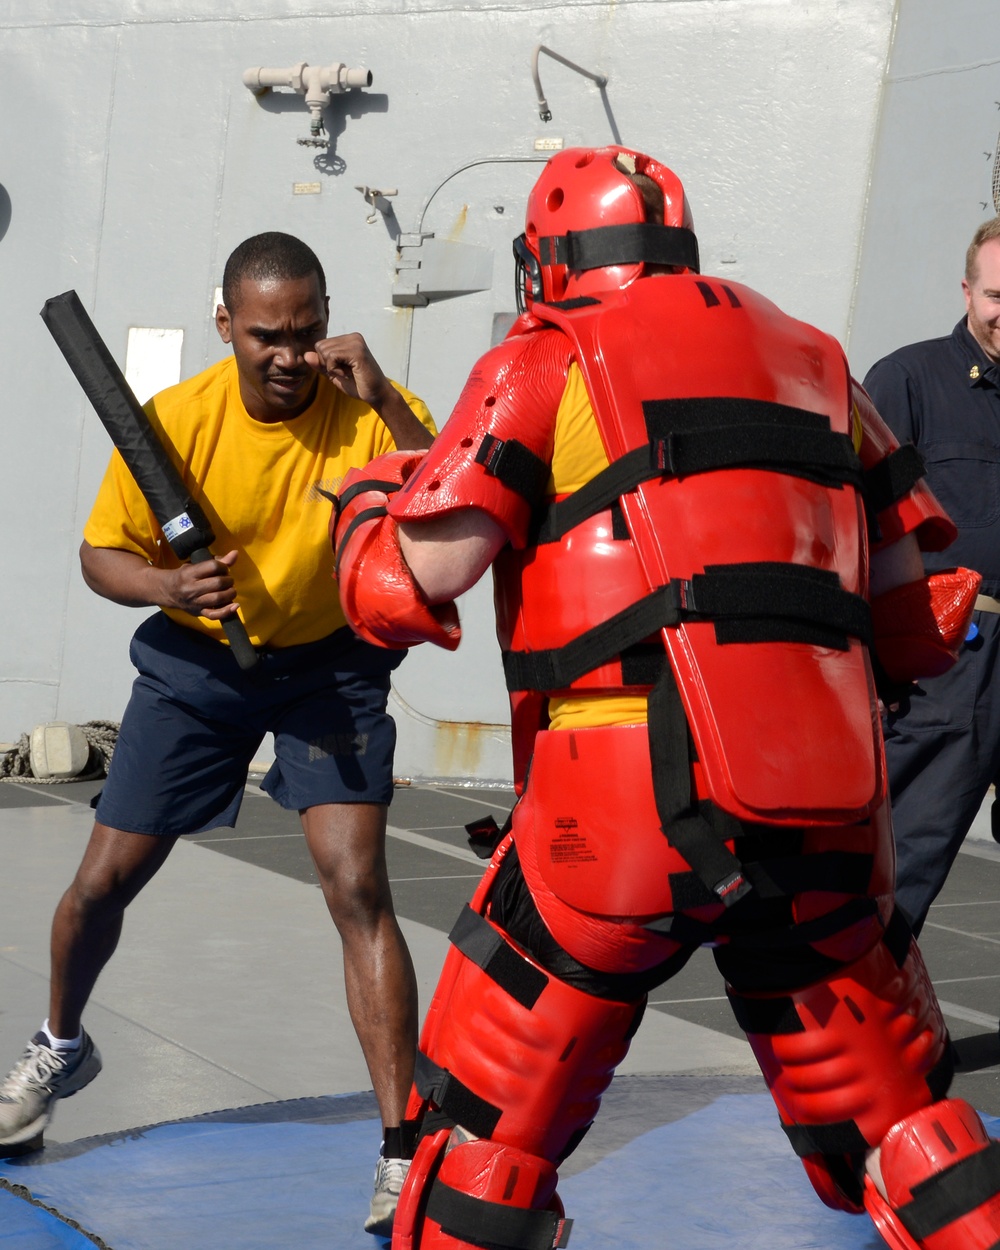 USS Mesa Verde force protection training exercise